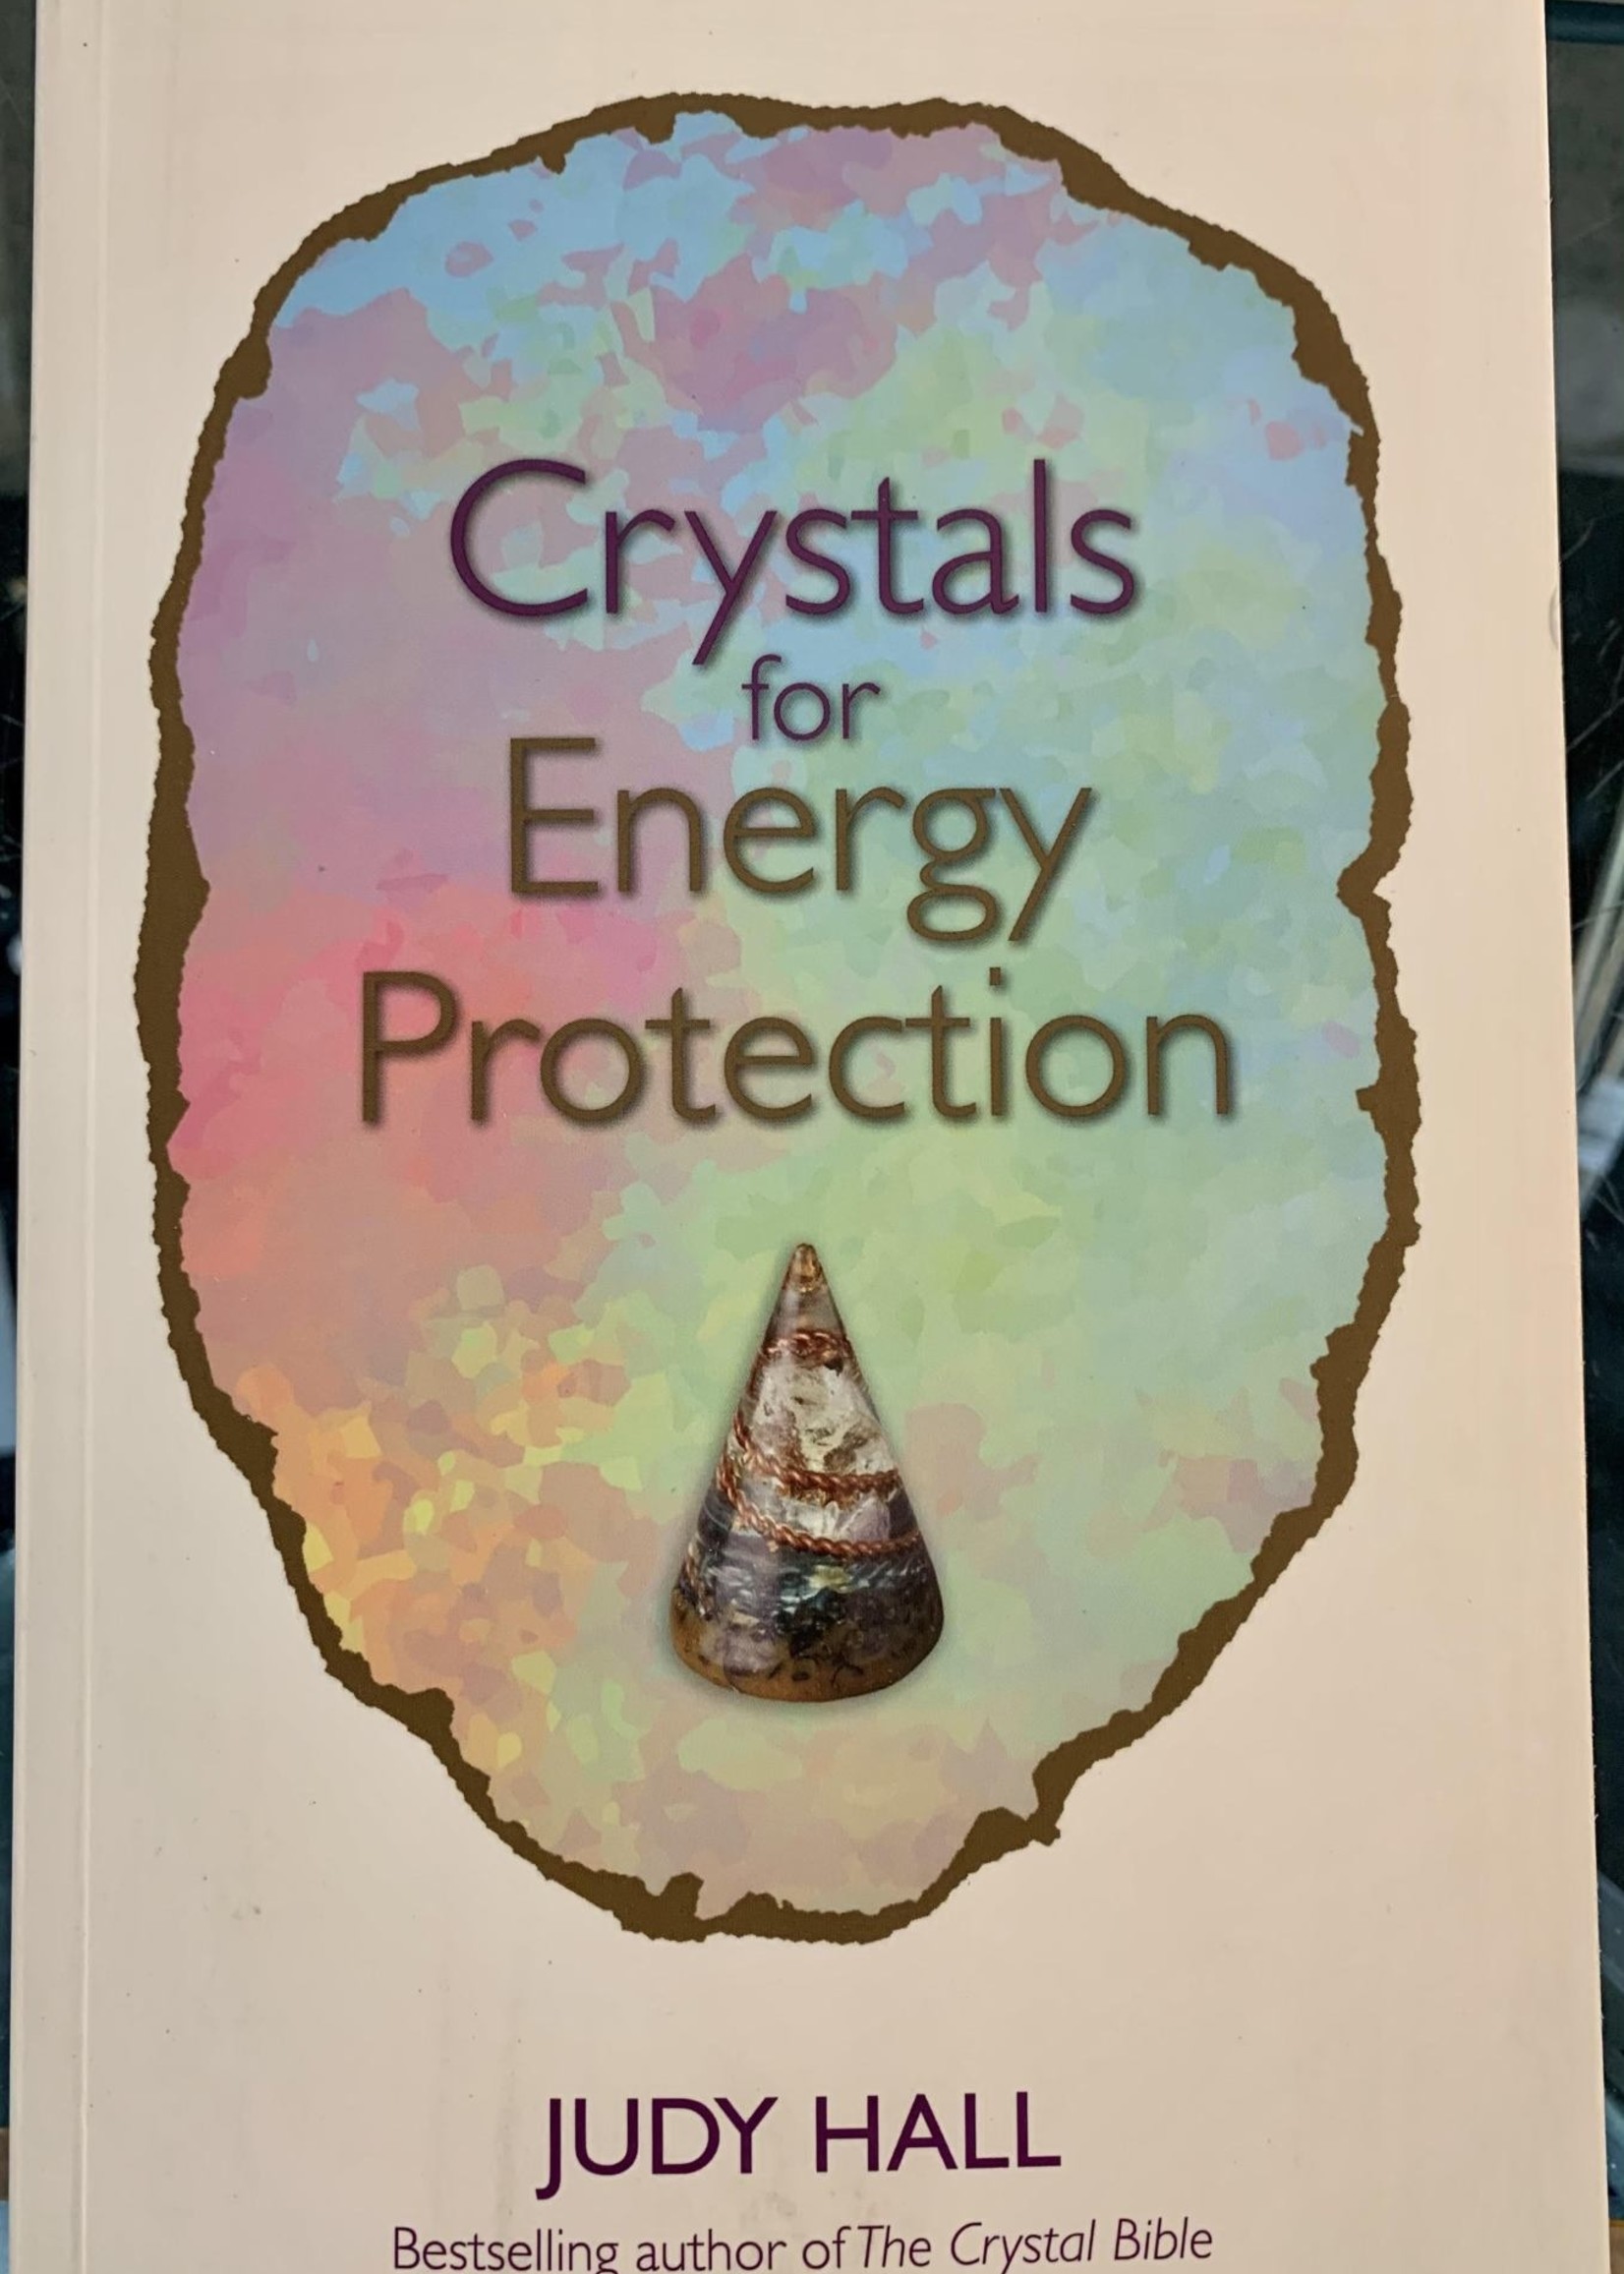 Crystals for Energy Protection - By JUDY HALL